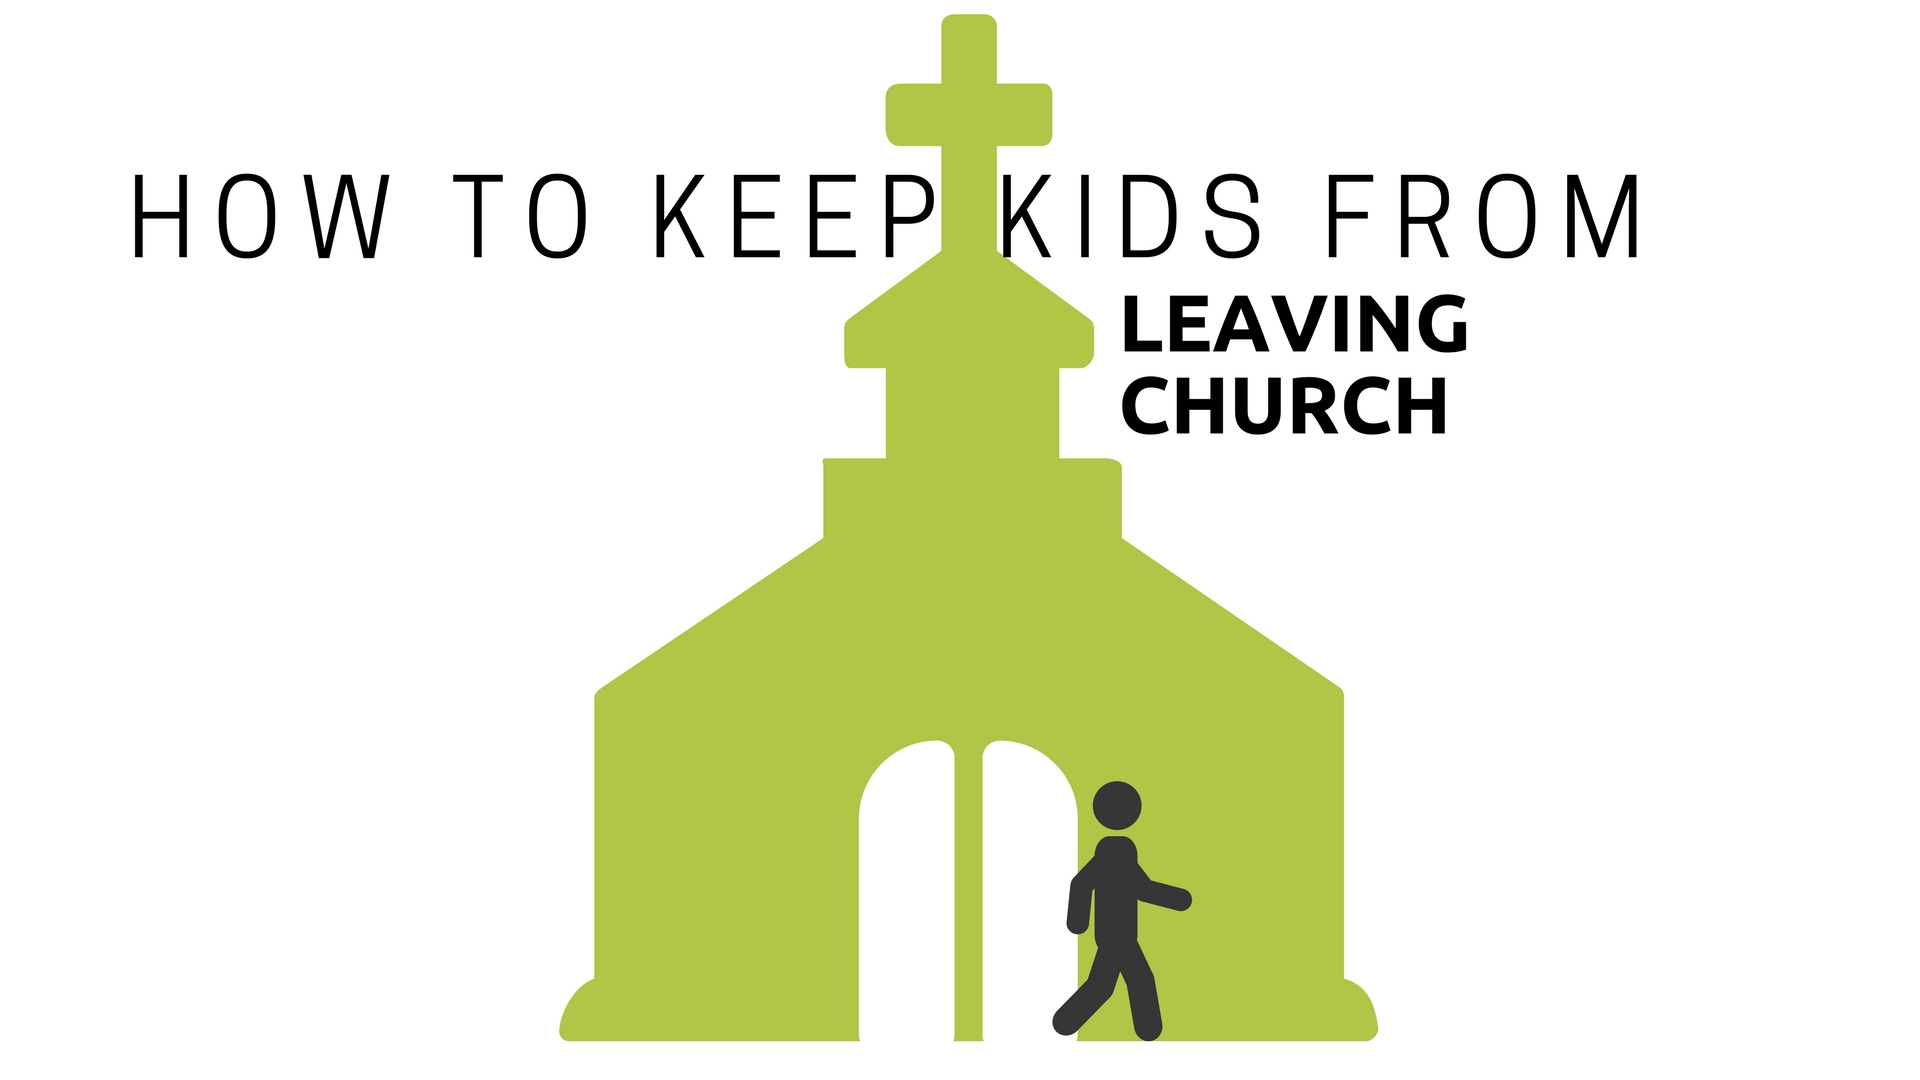 How to keep kids from leaving church